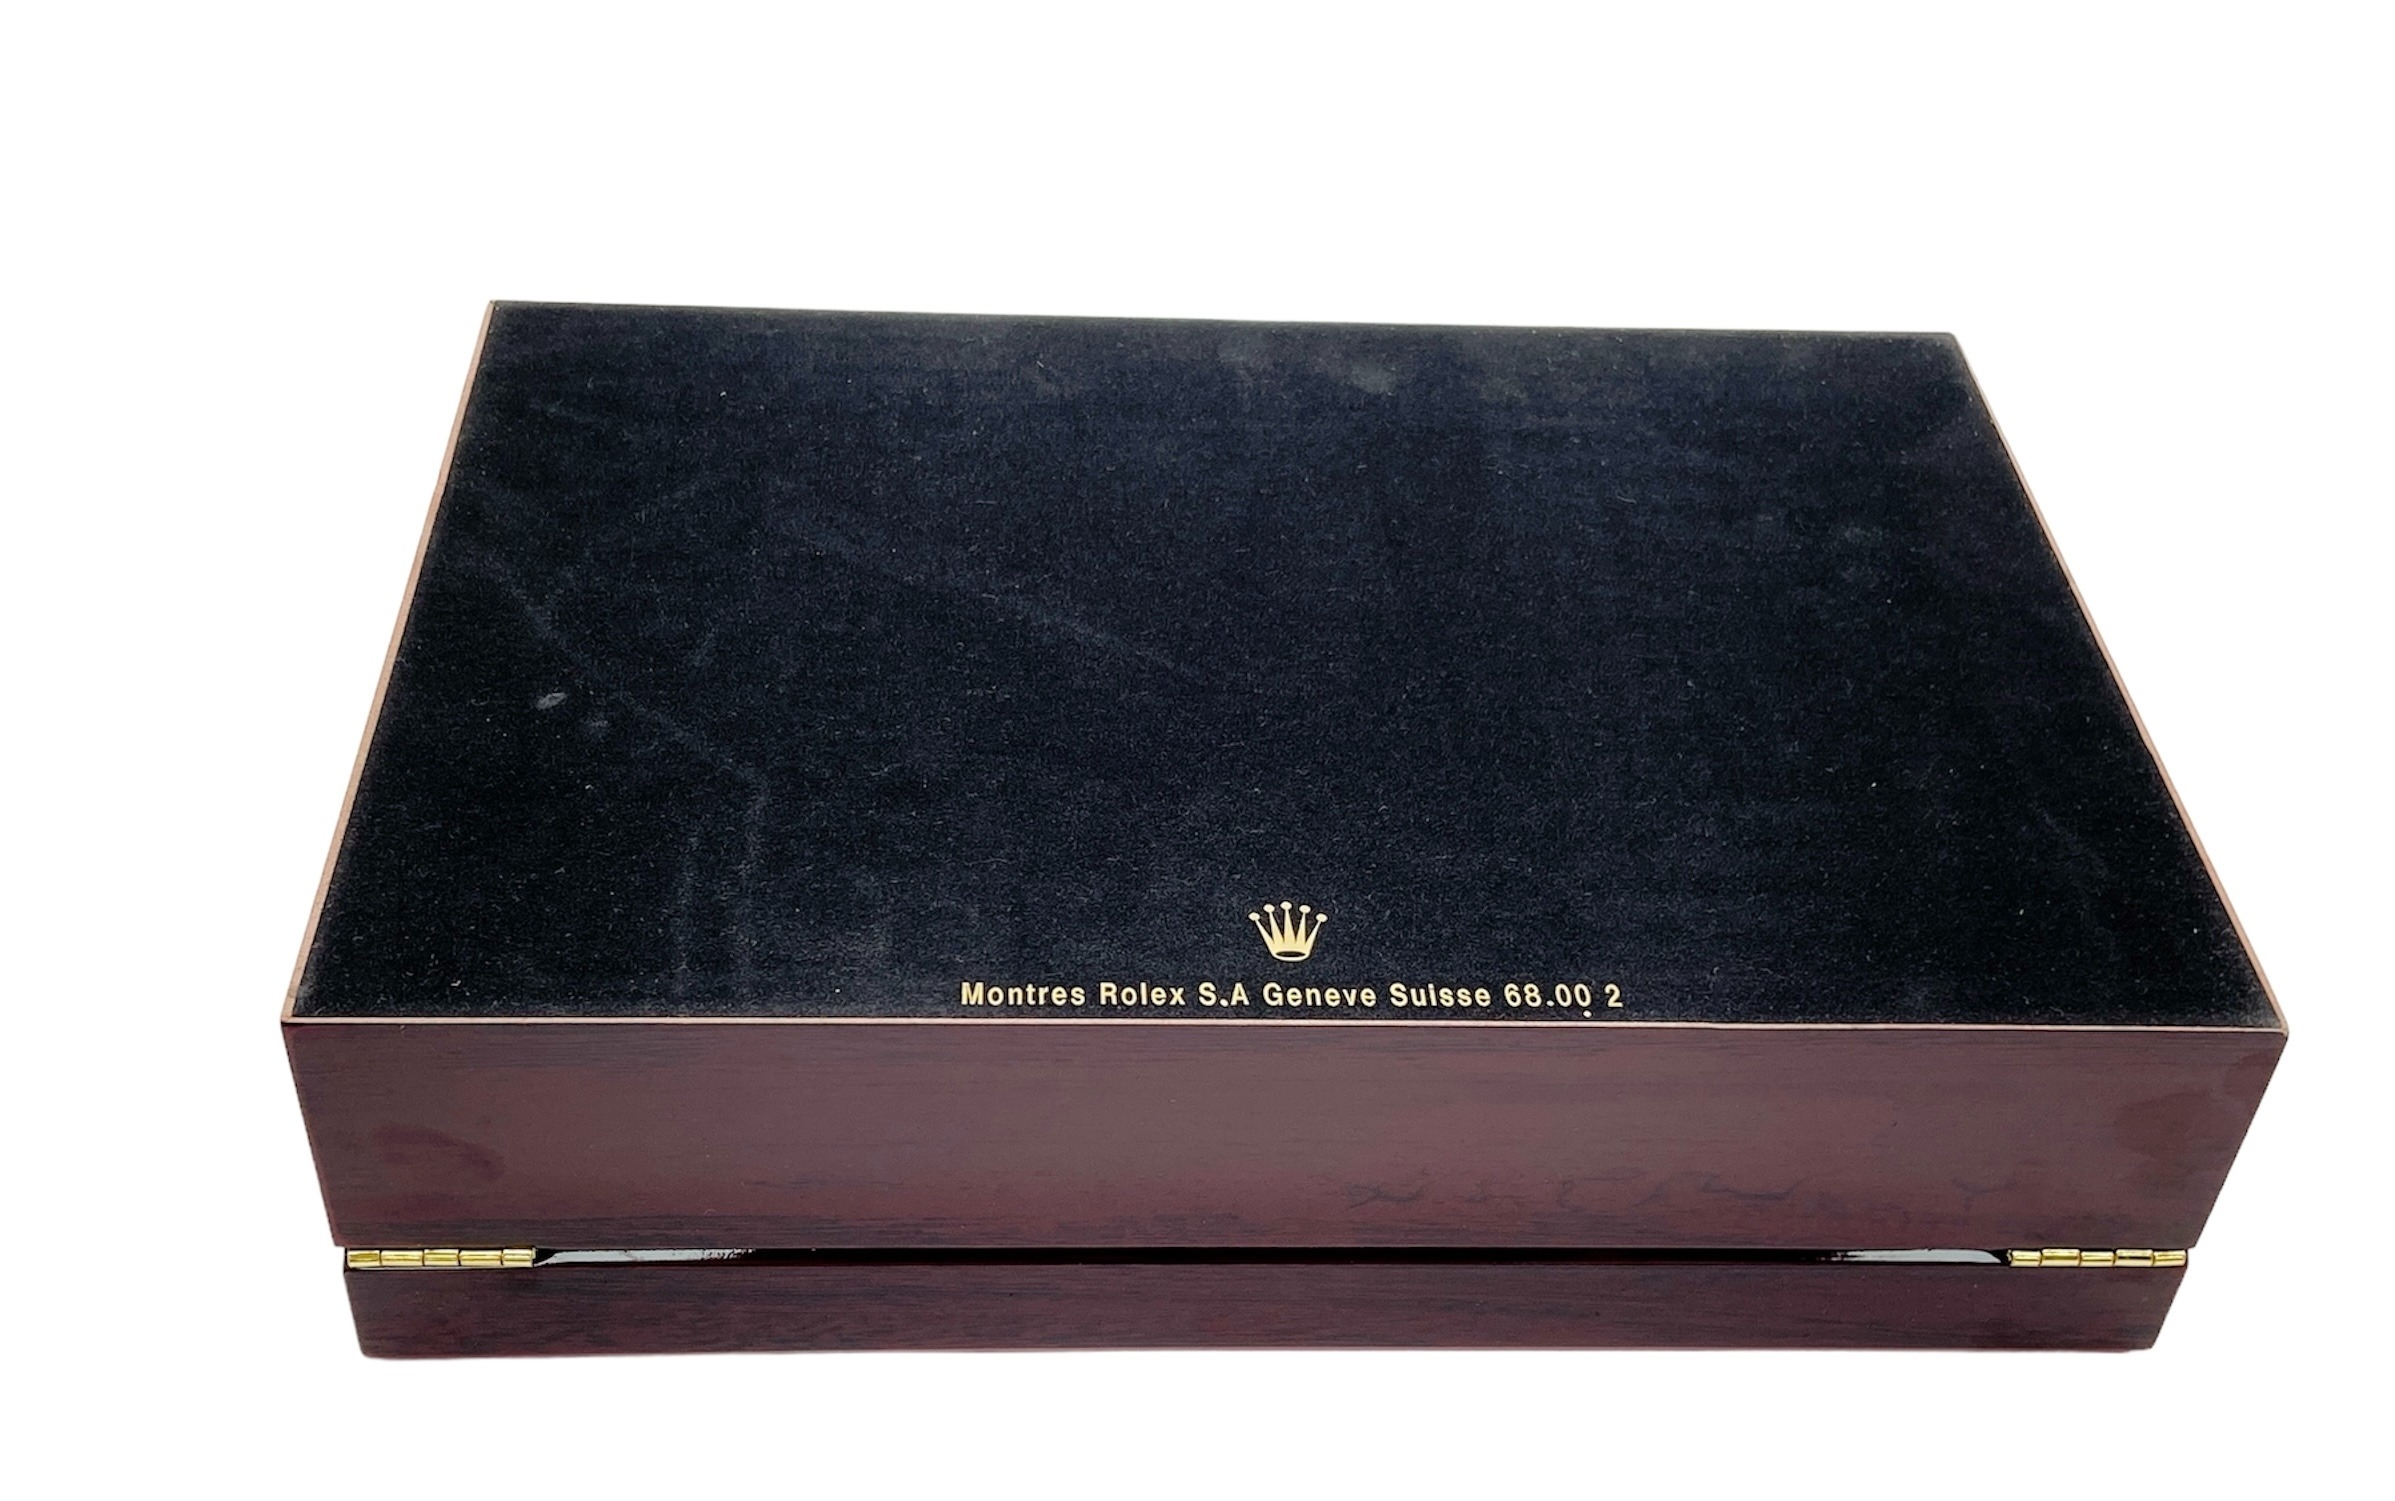 An Unused 12 Watch Display Case. Perfect for Rolex watches. 31.5 x 21.5 x 8.5cm. Rich Piano Finish. - Image 7 of 12